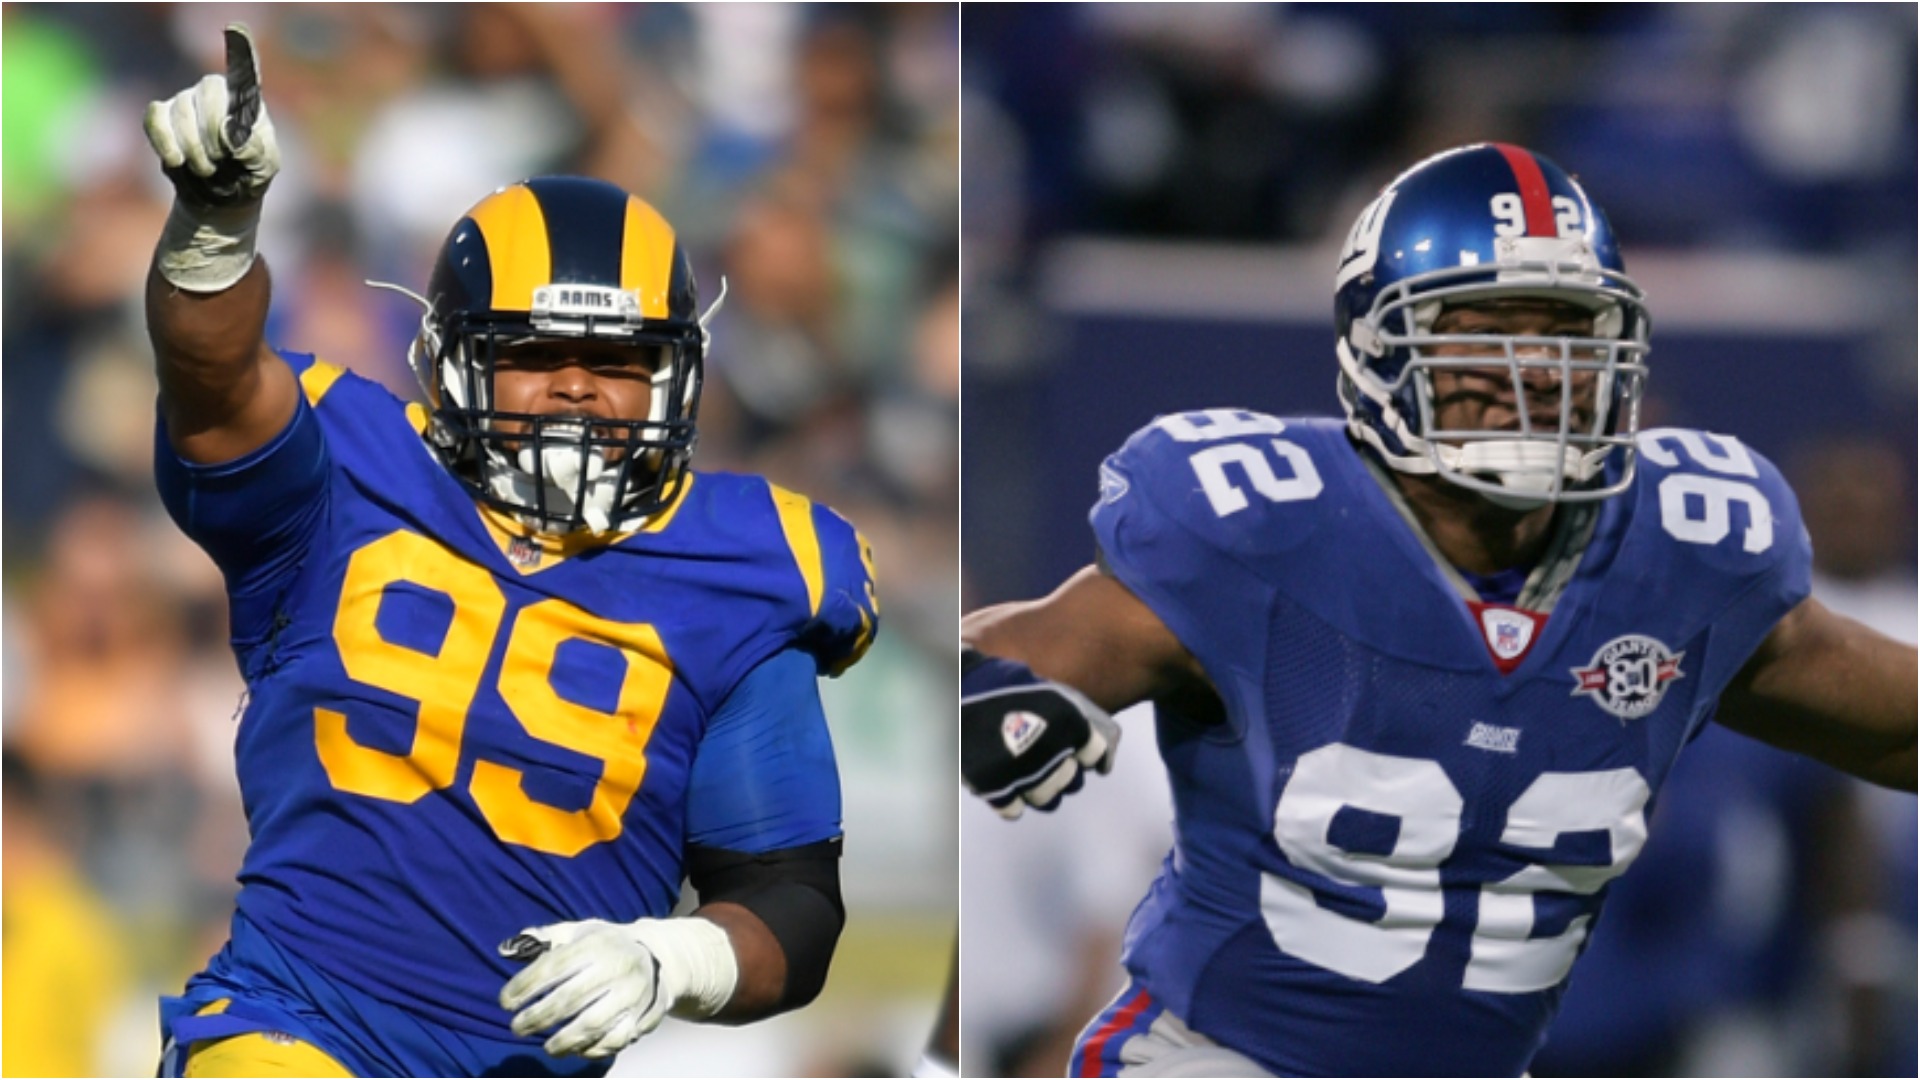 Through 12 games Los Angeles Rams defensive tackle Aaron Donald has 16.5 sacks and needs 6.5 more to break Michael Strahan's NFL record.